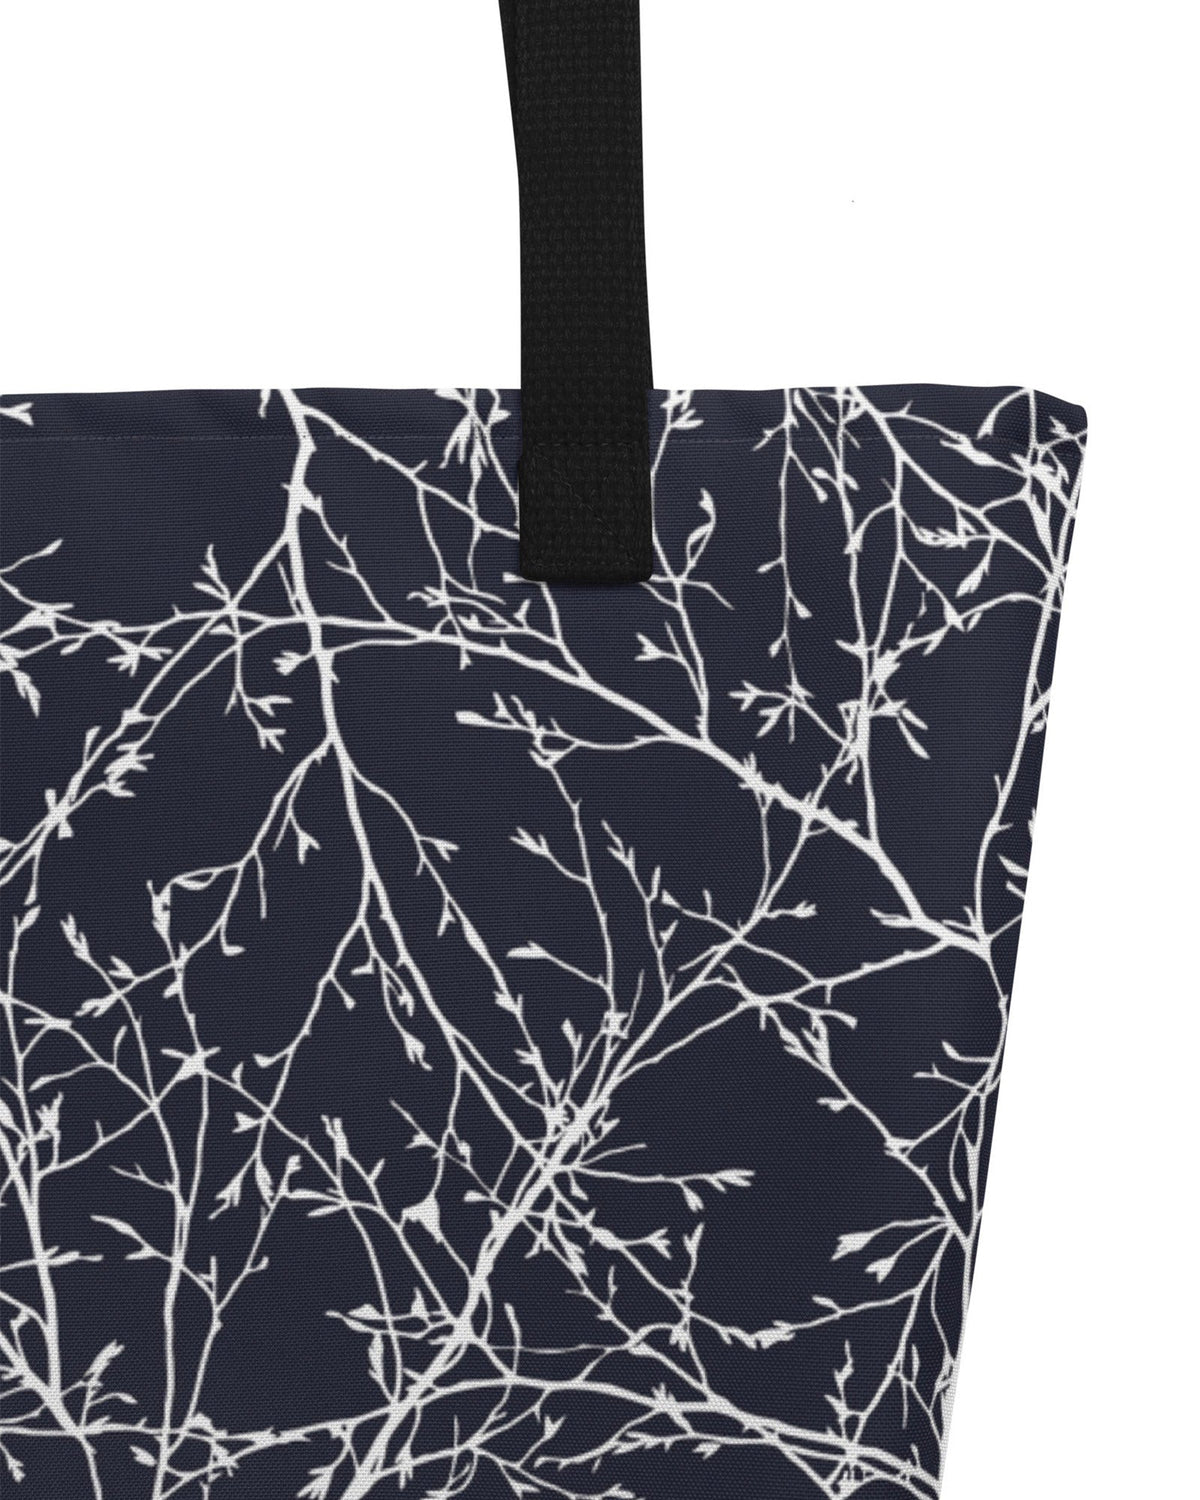 Willow Trail Open Tote Bag